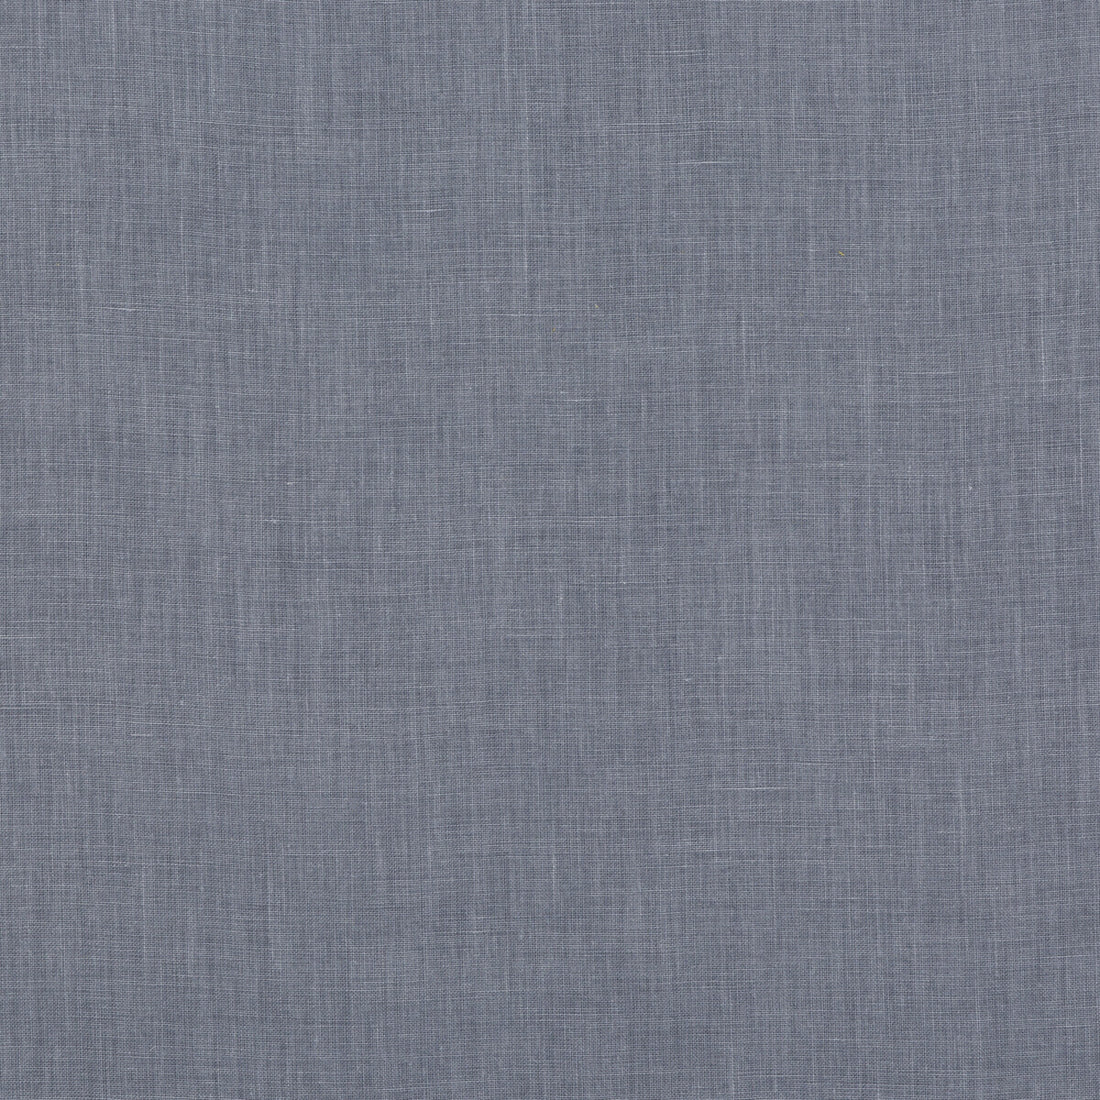 Weathered Linen fabric in denim color - pattern BF10962.640.0 - by G P &amp; J Baker in the Baker House Linens collection